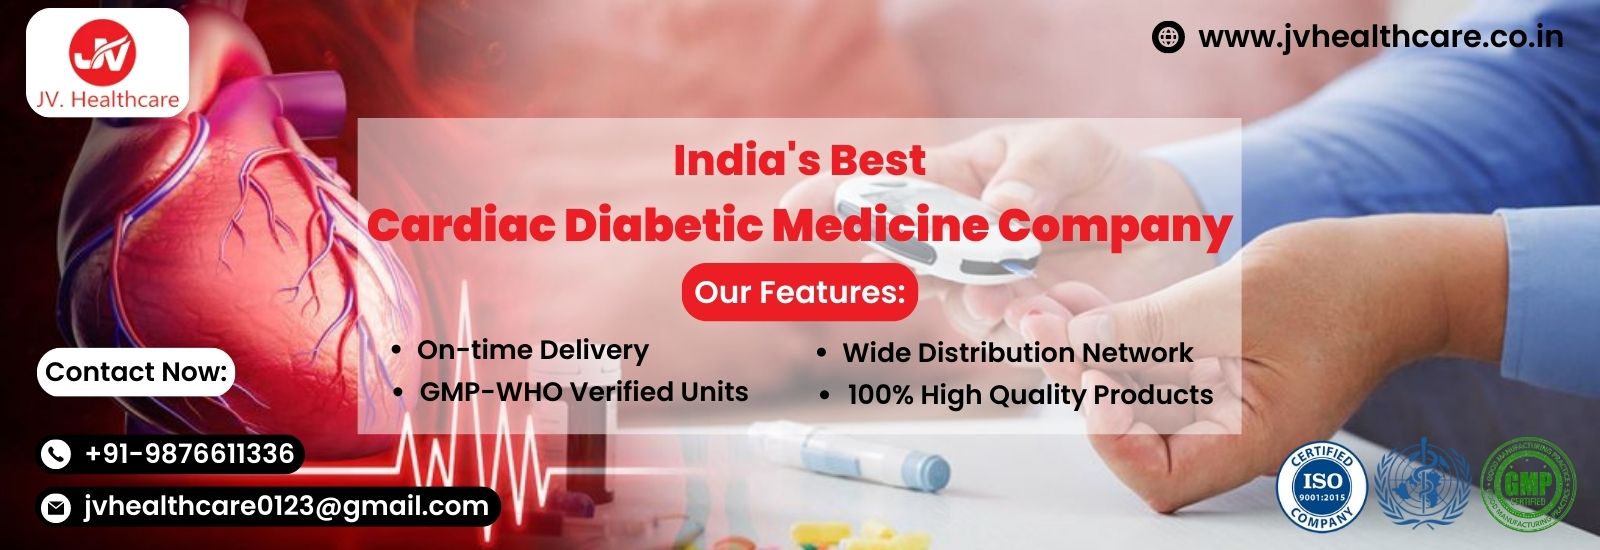 The Upcoming Cardiac Diabetic Medicine & Products Franchise Company | JV Healthcare